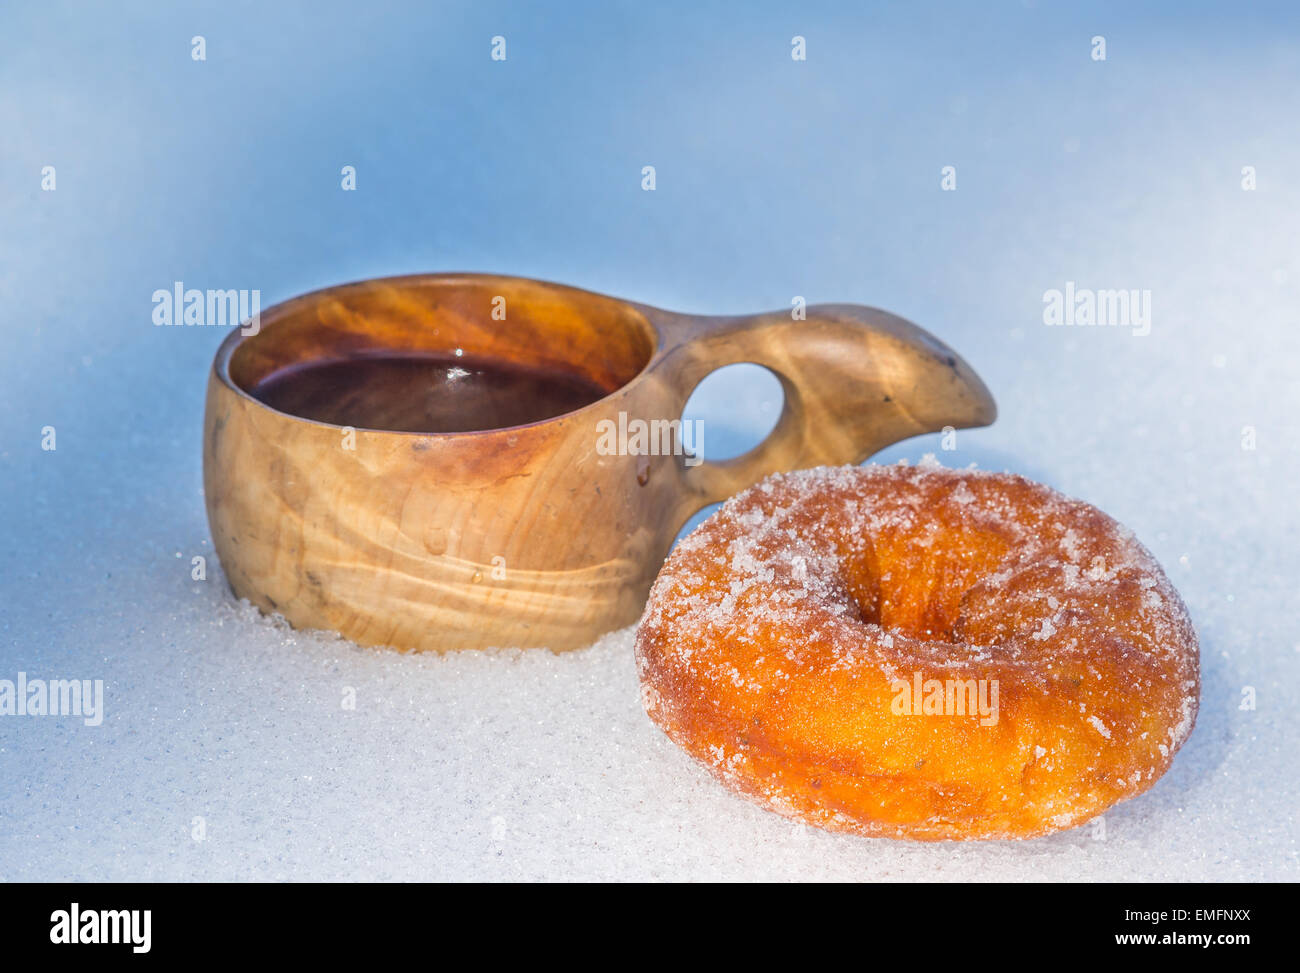 Coffee on wooden cup and baked doughnut Stock Photo